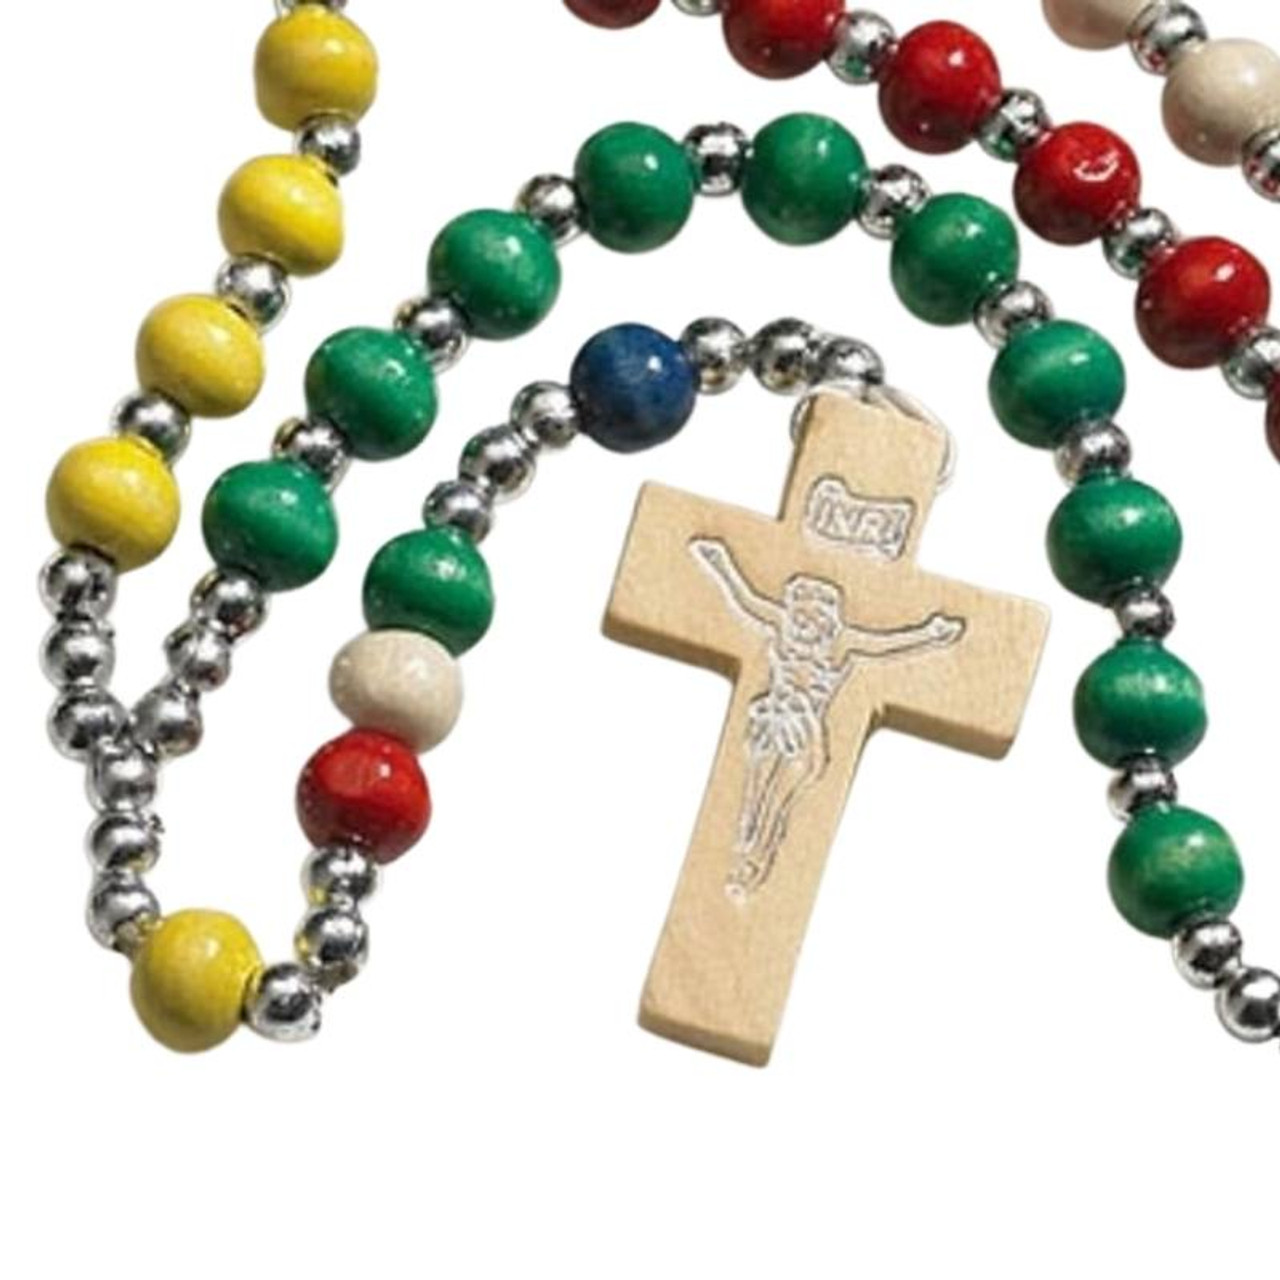 100 Christian Cross Beads, Choice of Color, Jewelry Making / Bible